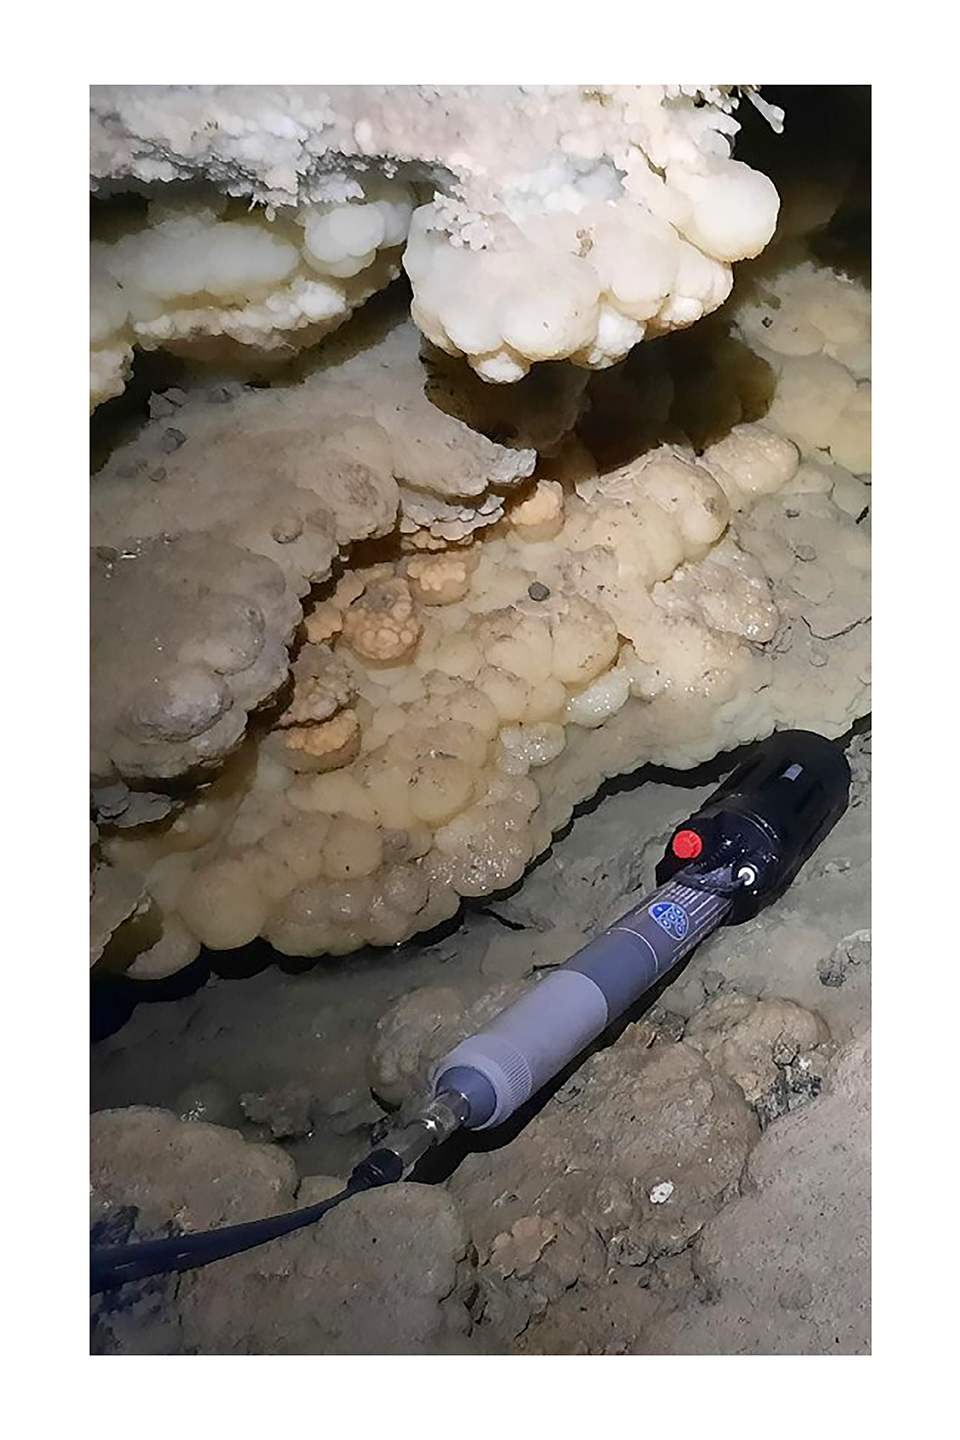 Instrument for measuring water quality surrounded by cave formations